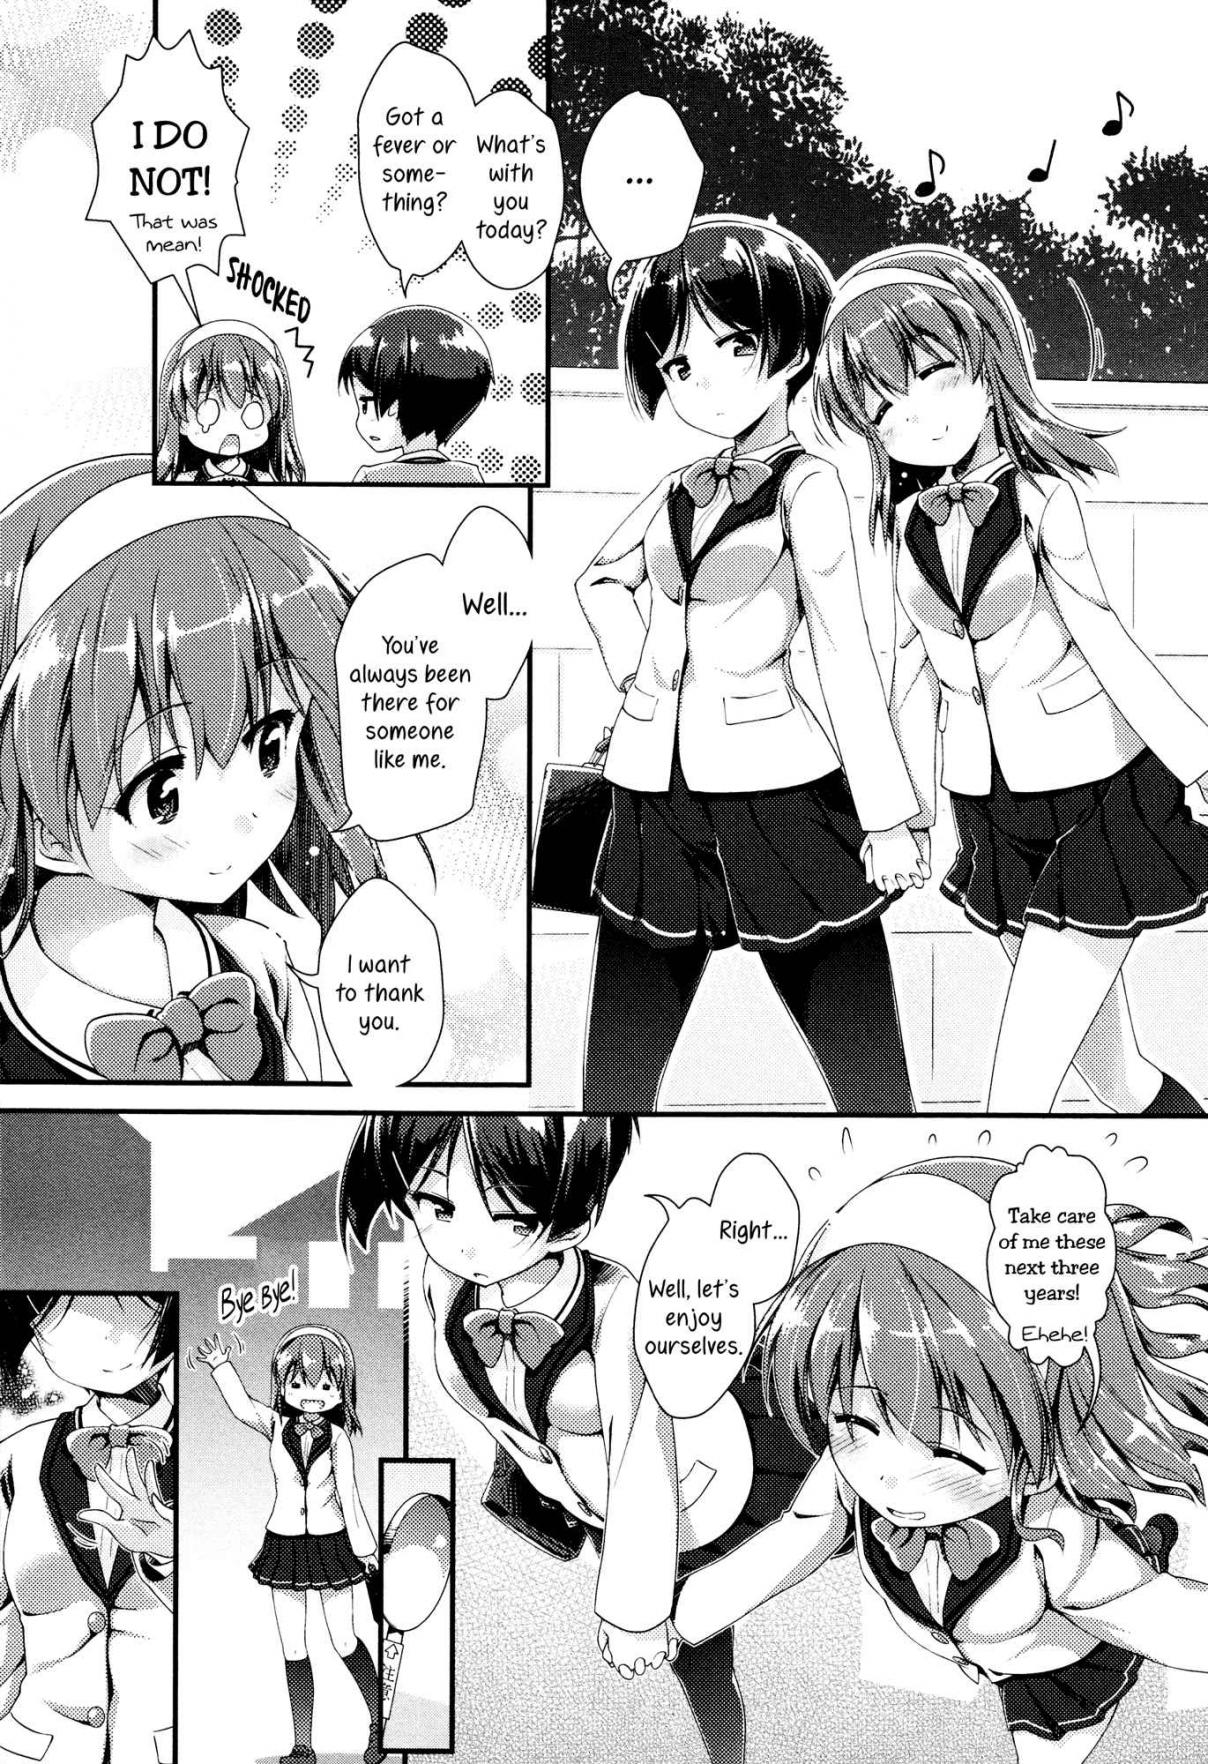 Mebae Vivid Girls Love Anthology Vol. 3 Ch. 4 The Pain of Your First Love